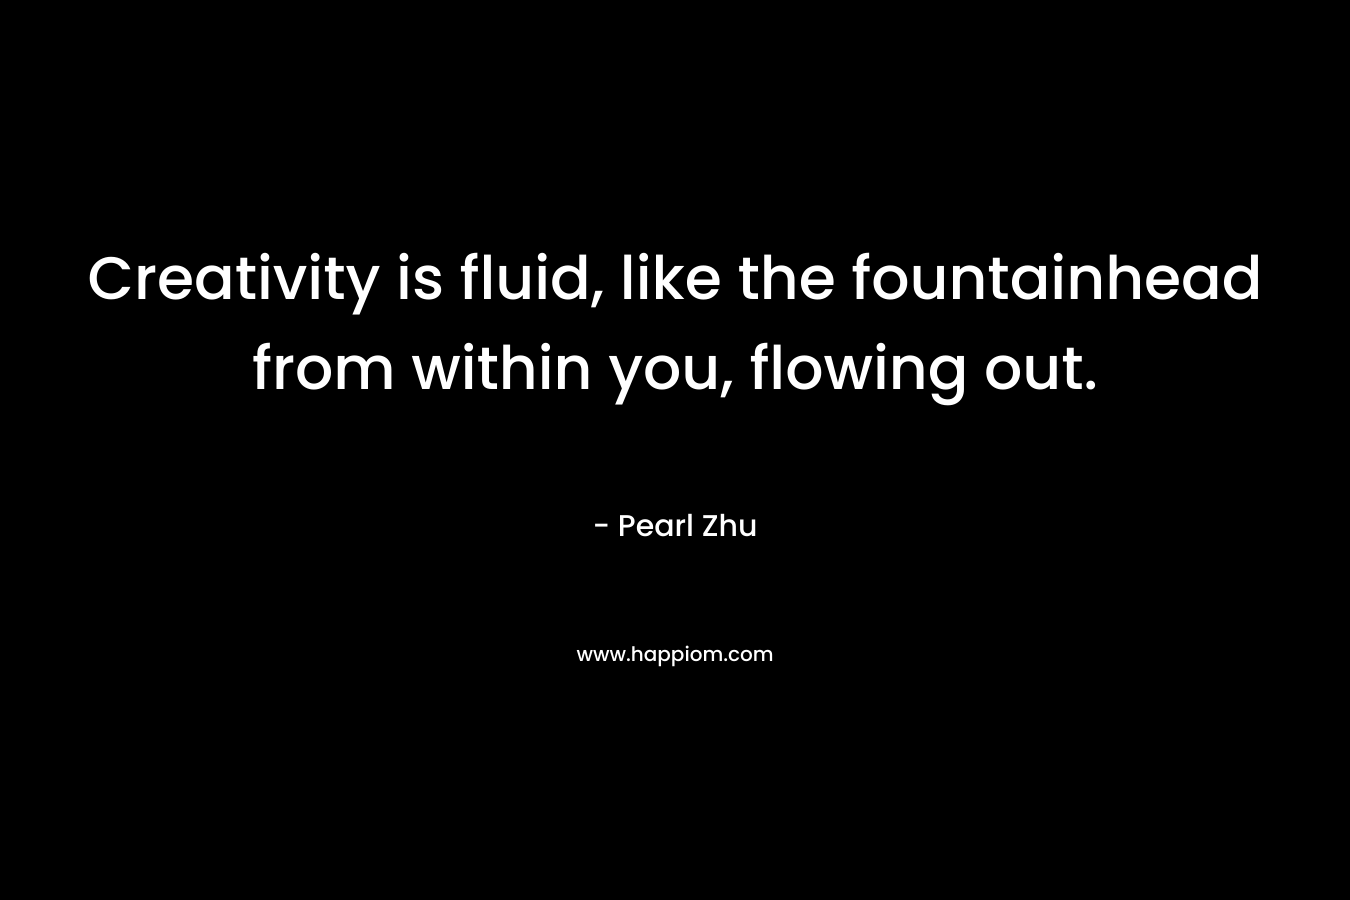 Creativity is fluid, like the fountainhead from within you, flowing out. – Pearl Zhu